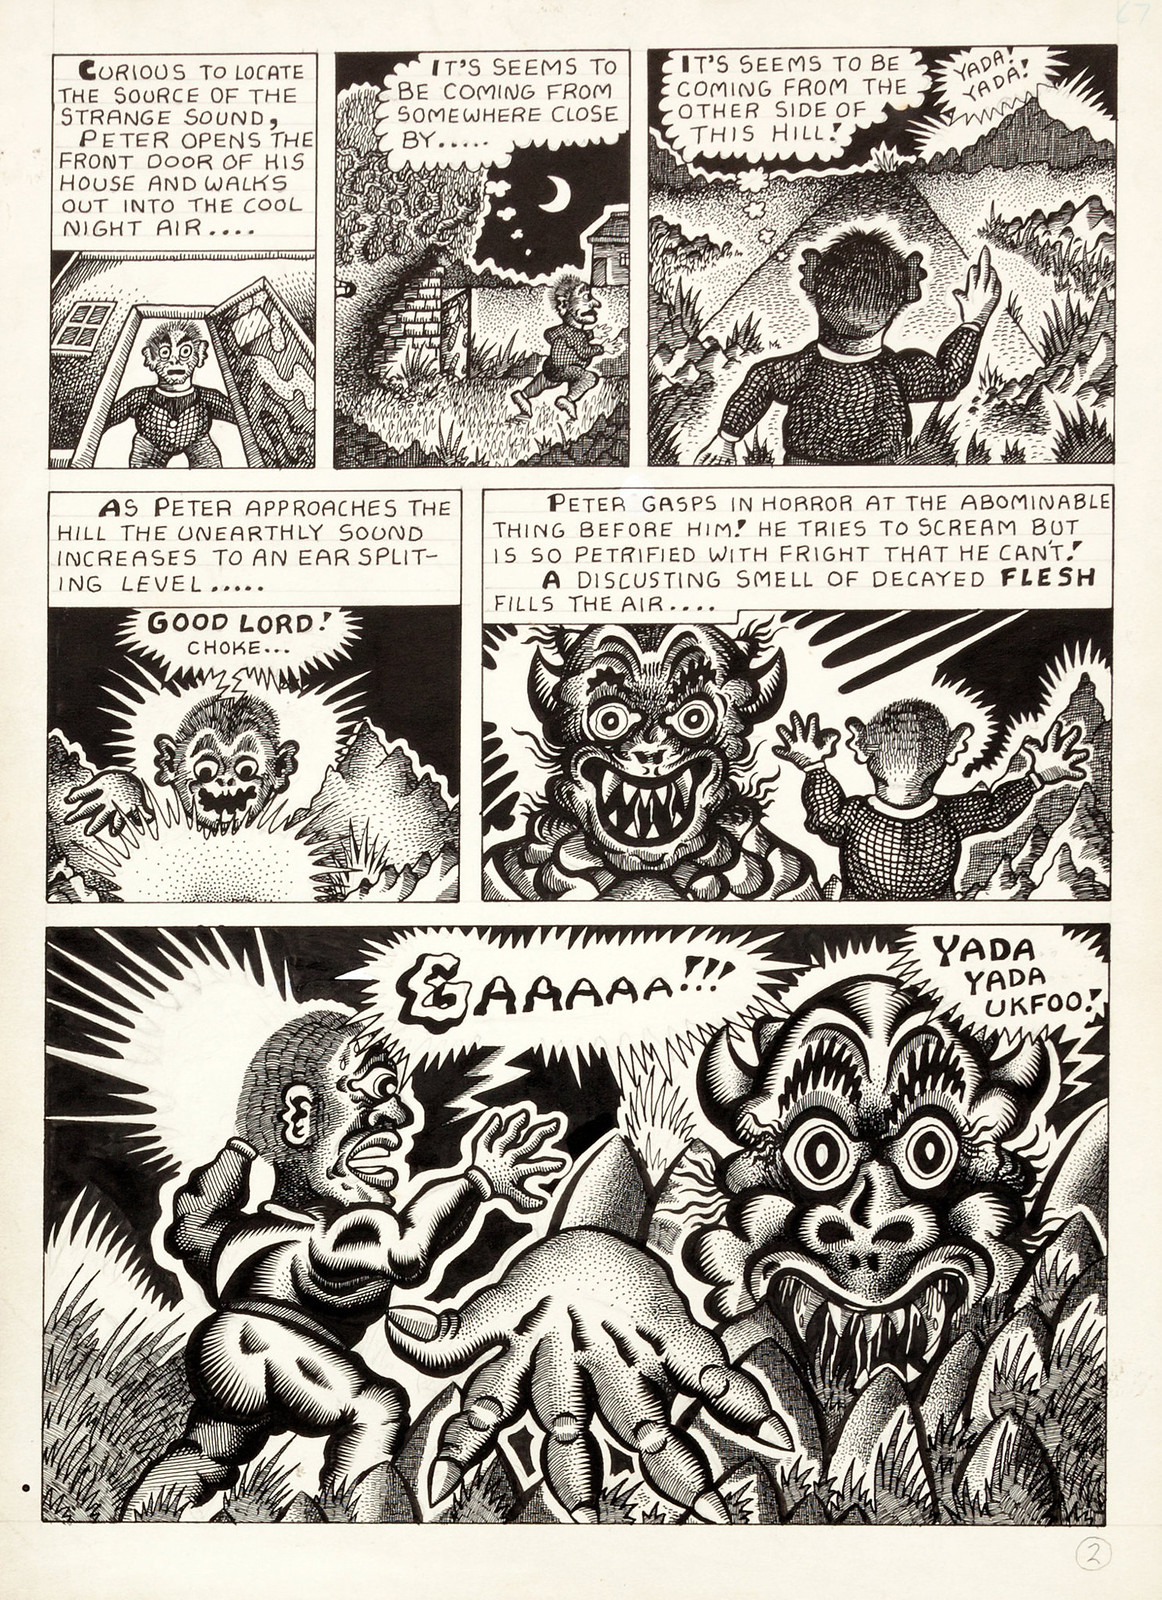 Rory Hayes - Insect Fear #3 "The Midnight Monster" Page 2